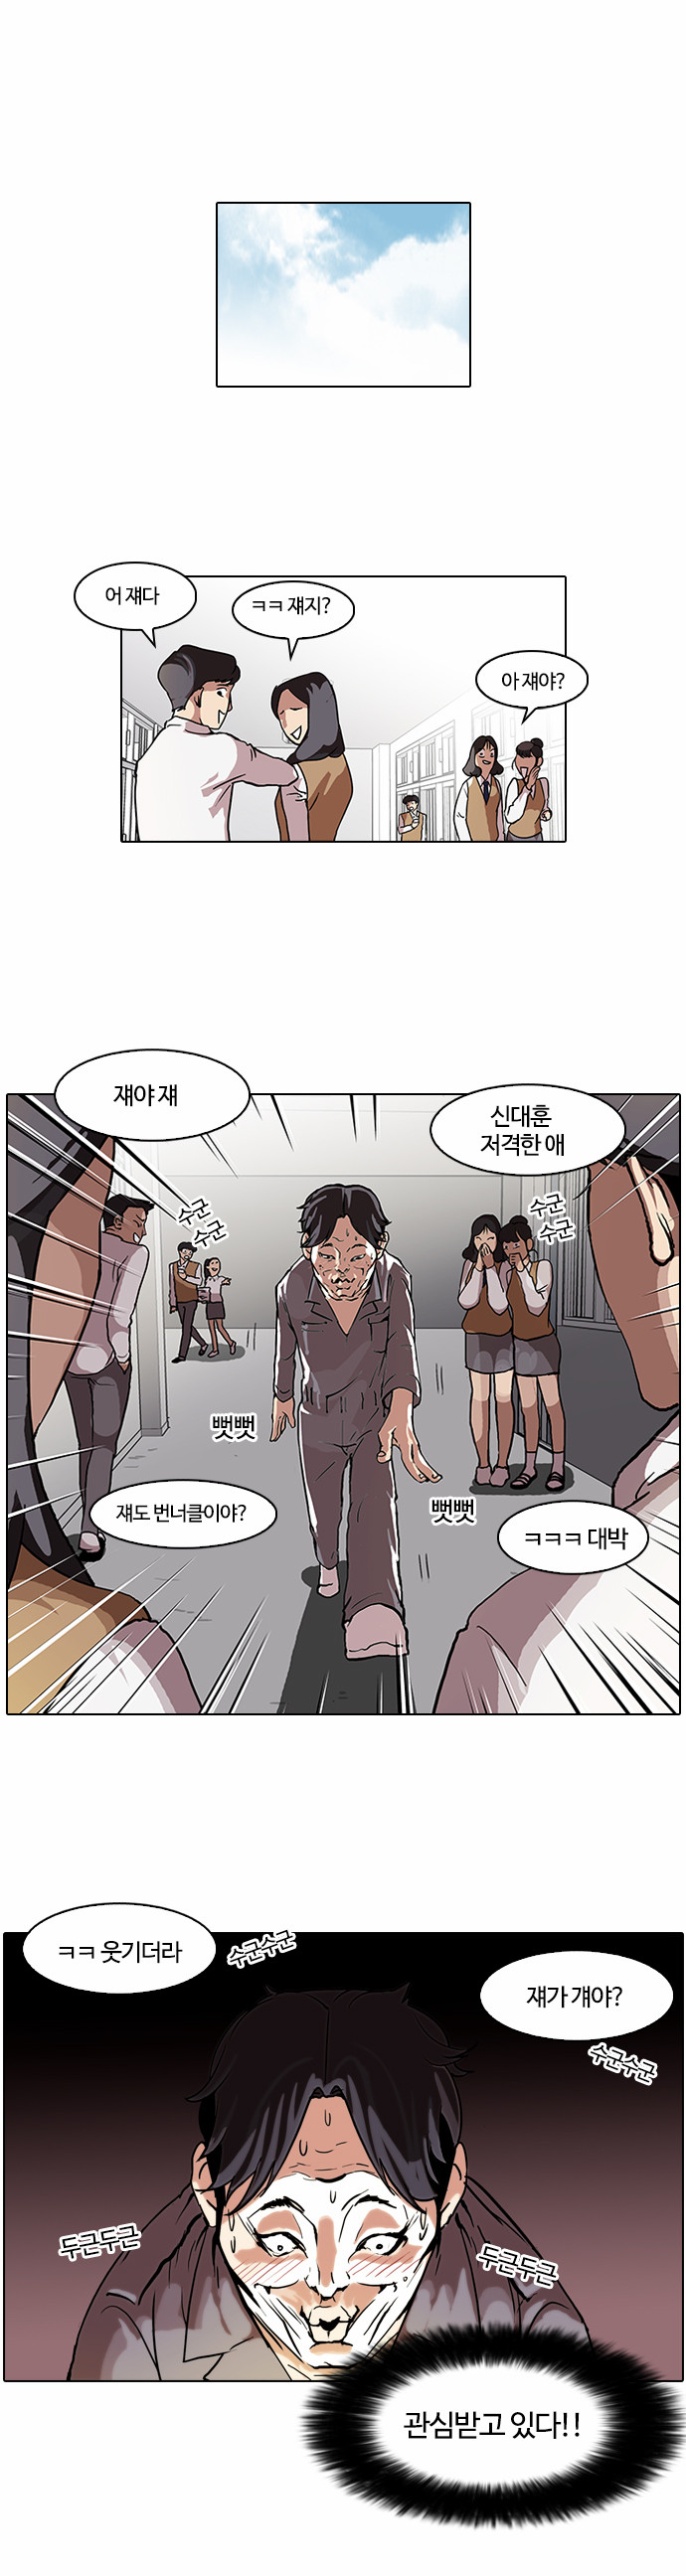 Lookism - Chapter 64 - Page 1